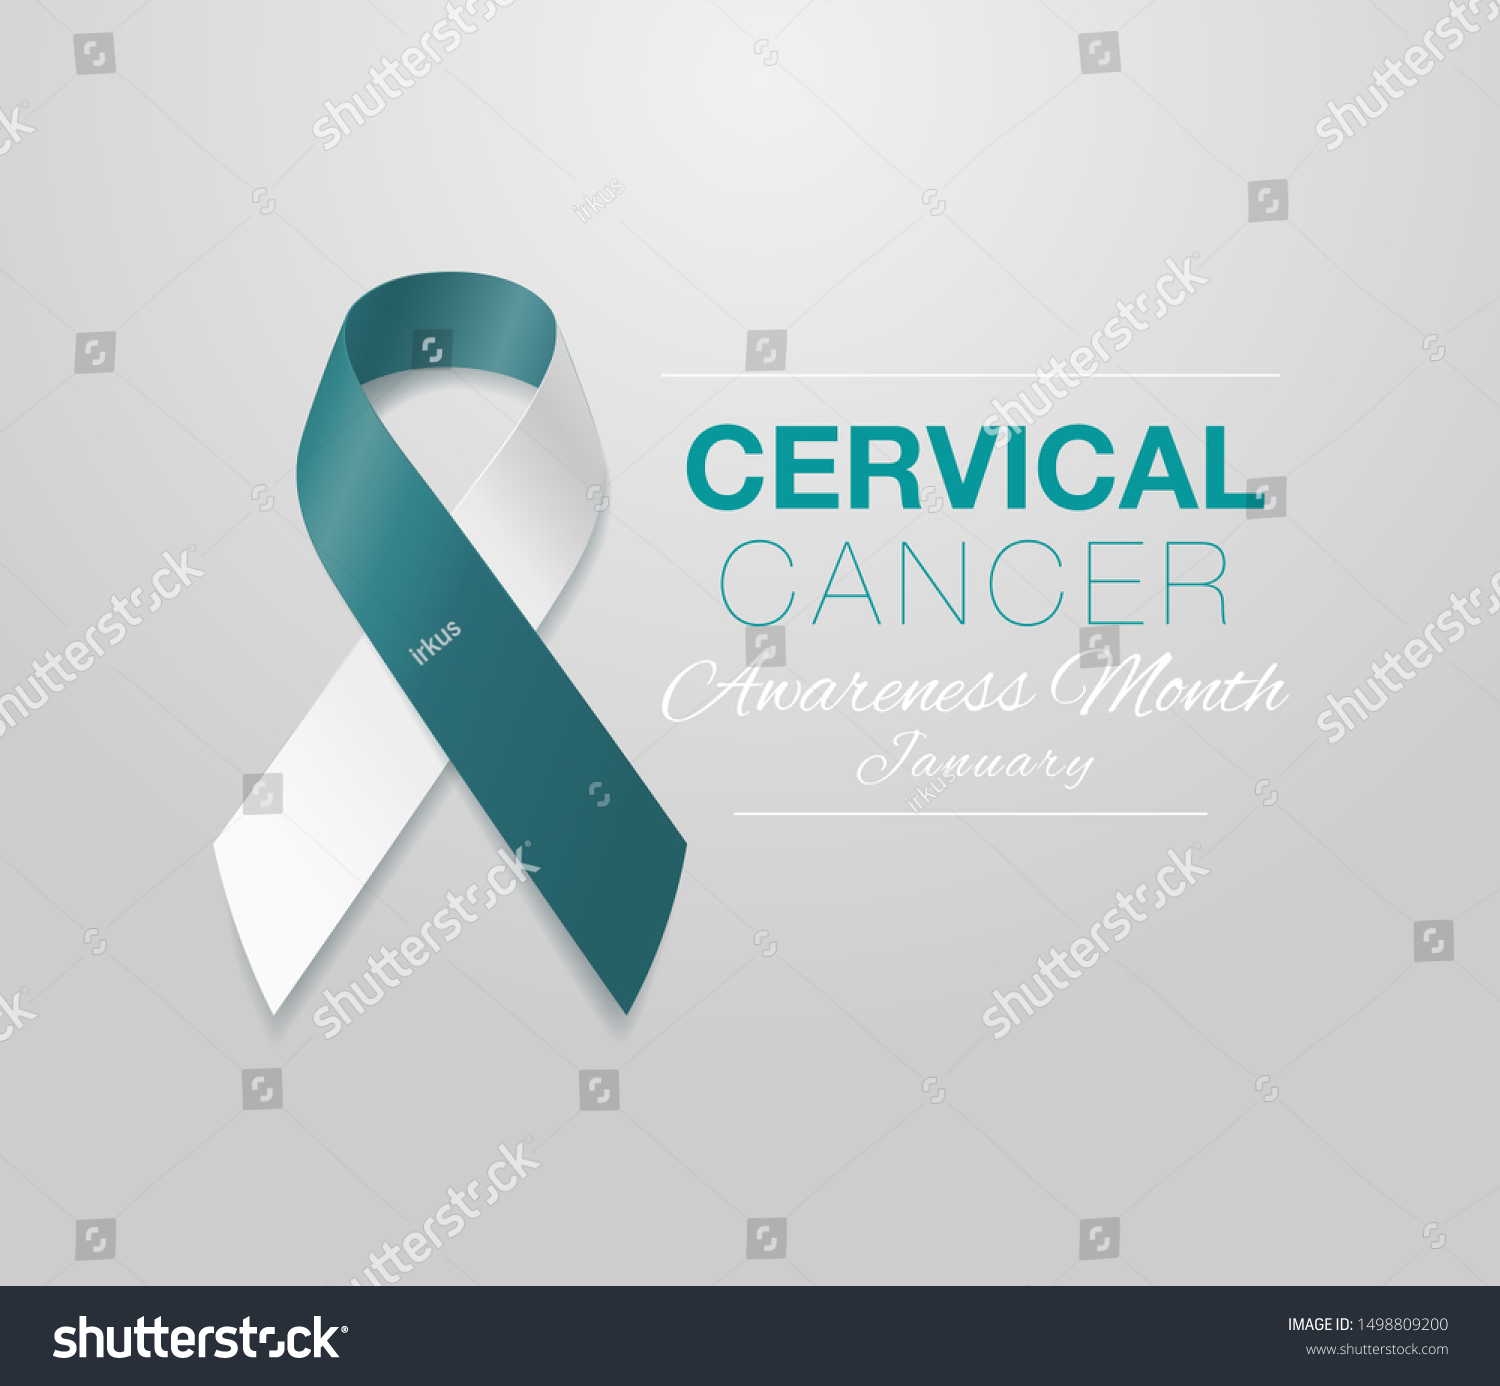 Cervical Cancer Awareness Calligraphy Poster Design Stock Vector Royalty Free